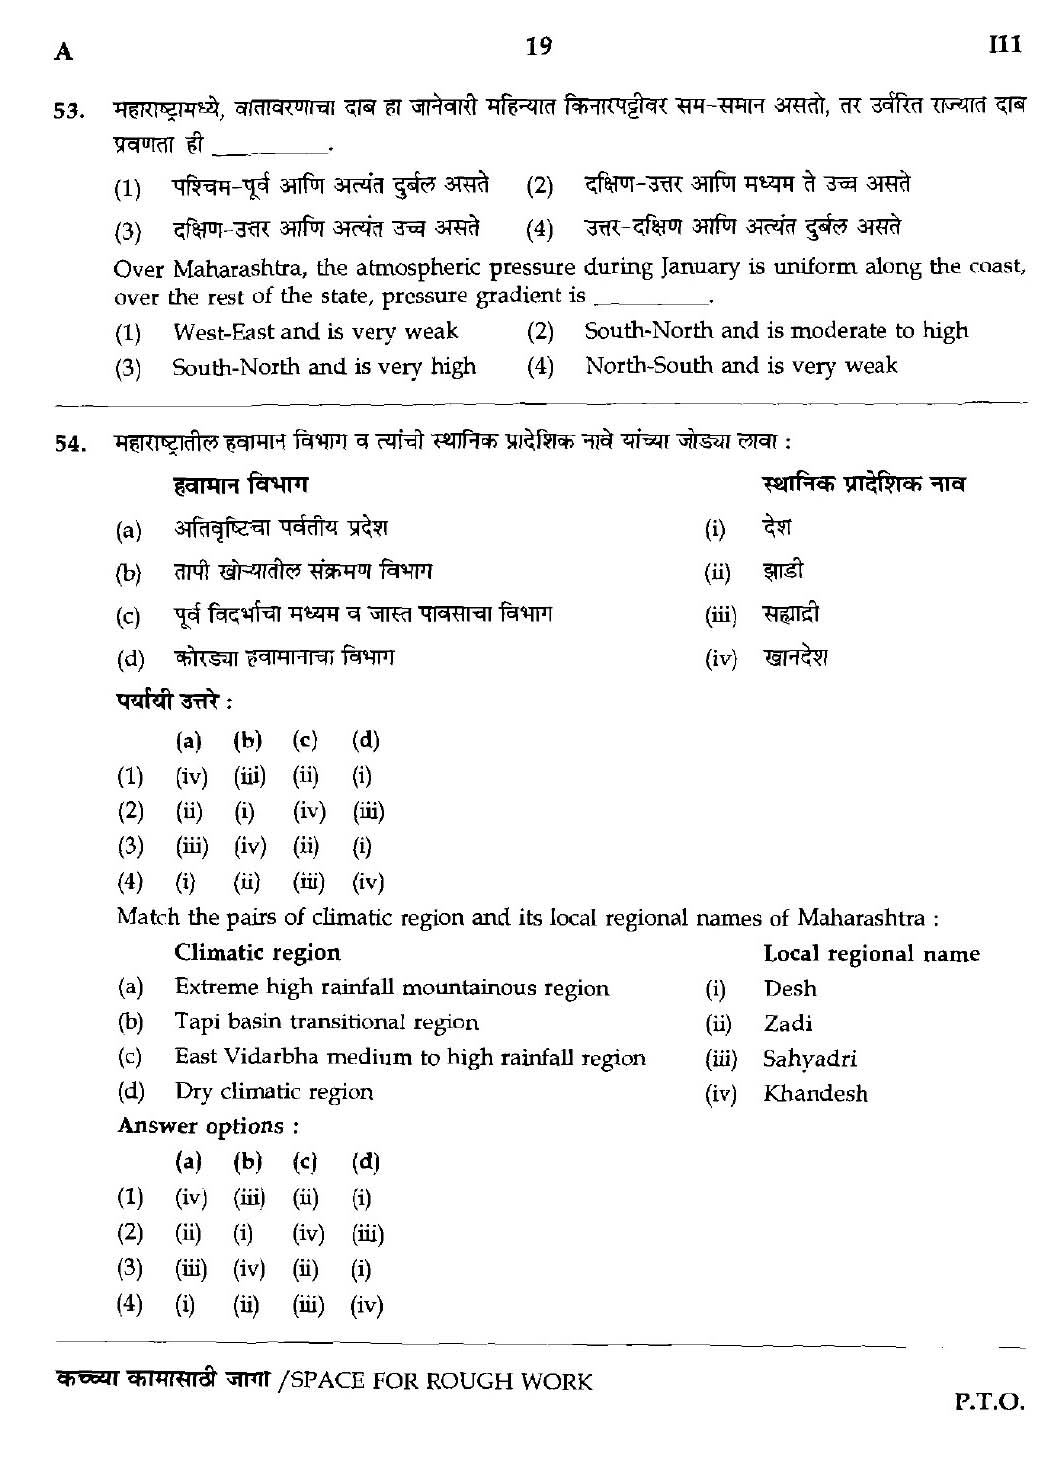 MPSC Agricultural Services Preliminary Exam 2018 Question Paper 18